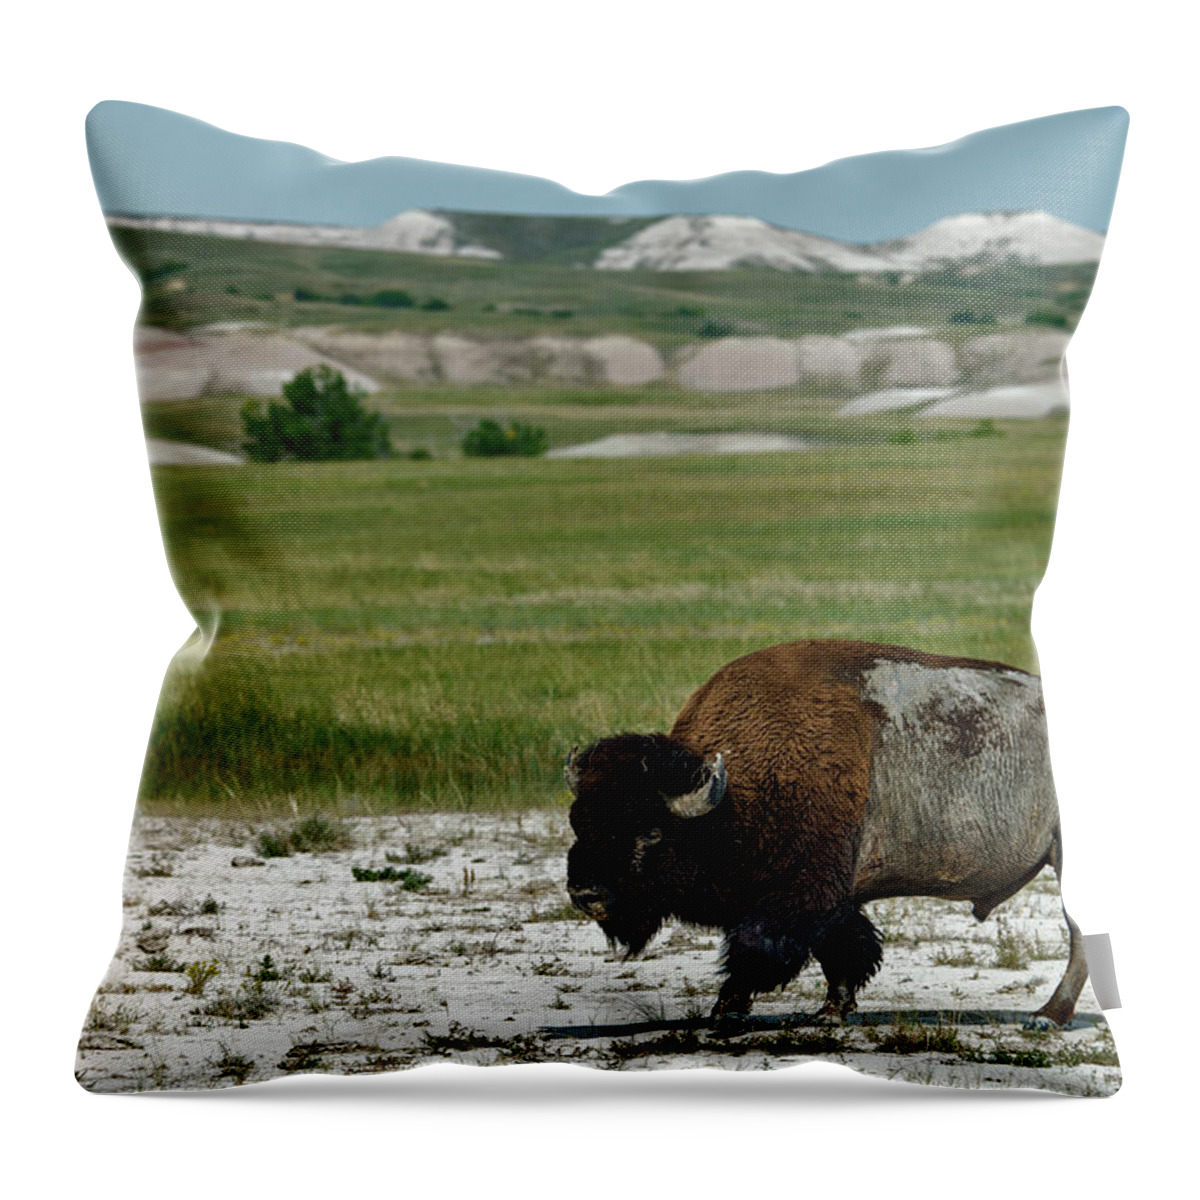 Horned Throw Pillow featuring the photograph Bison In Badlands National Park #1 by Mark Newman